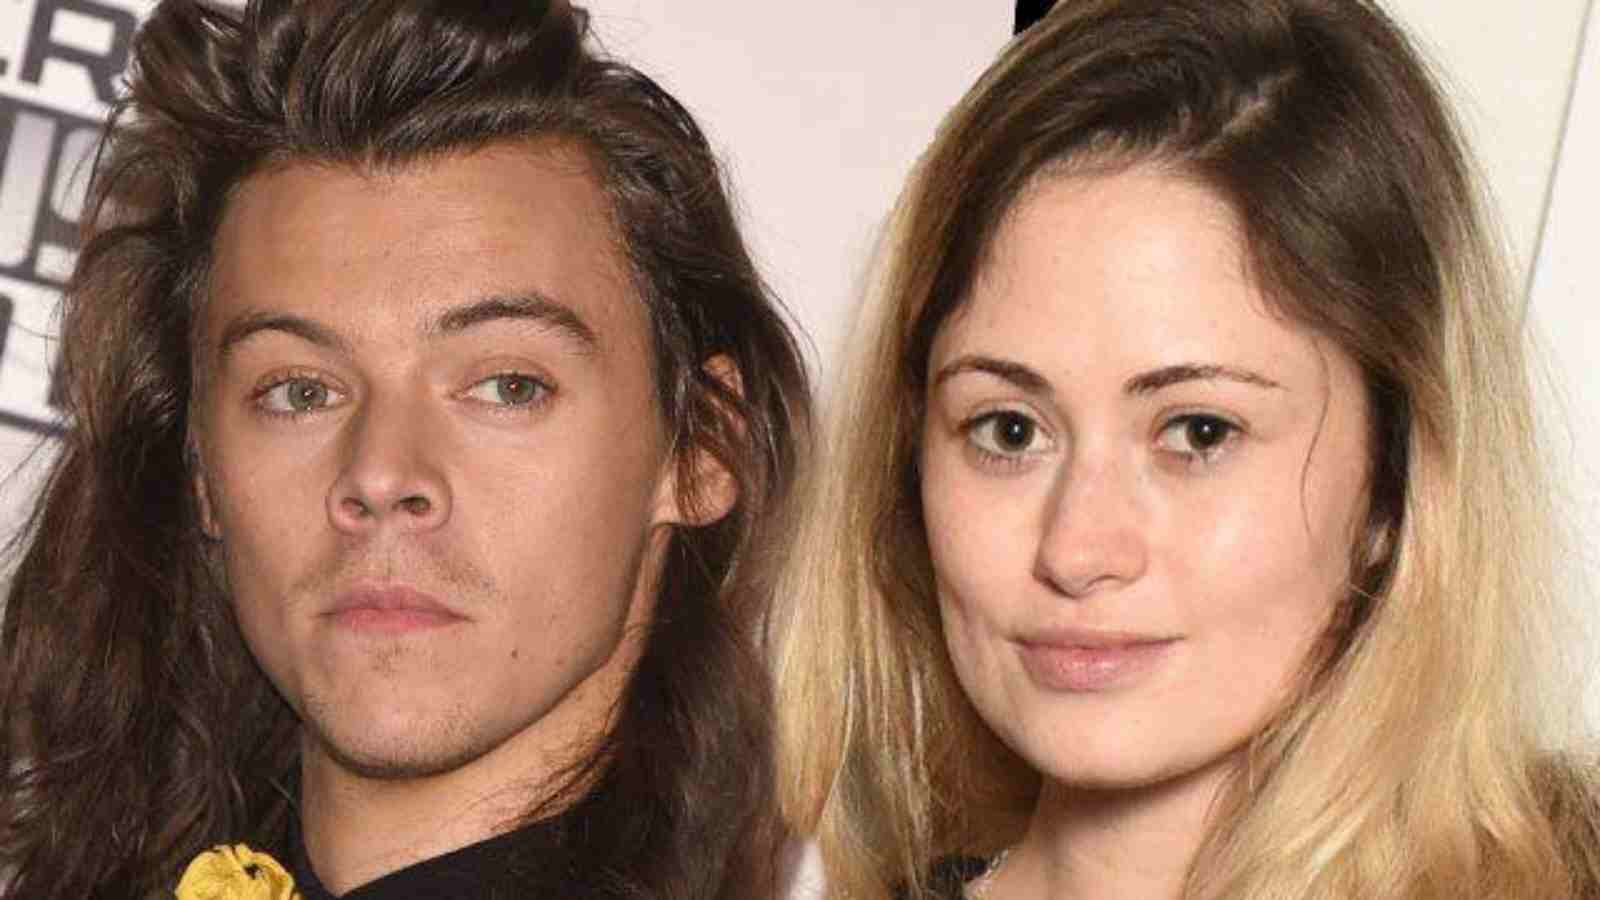 Many suspect Harry Styles cheated on Kendall Jenner with Pandora Lennard